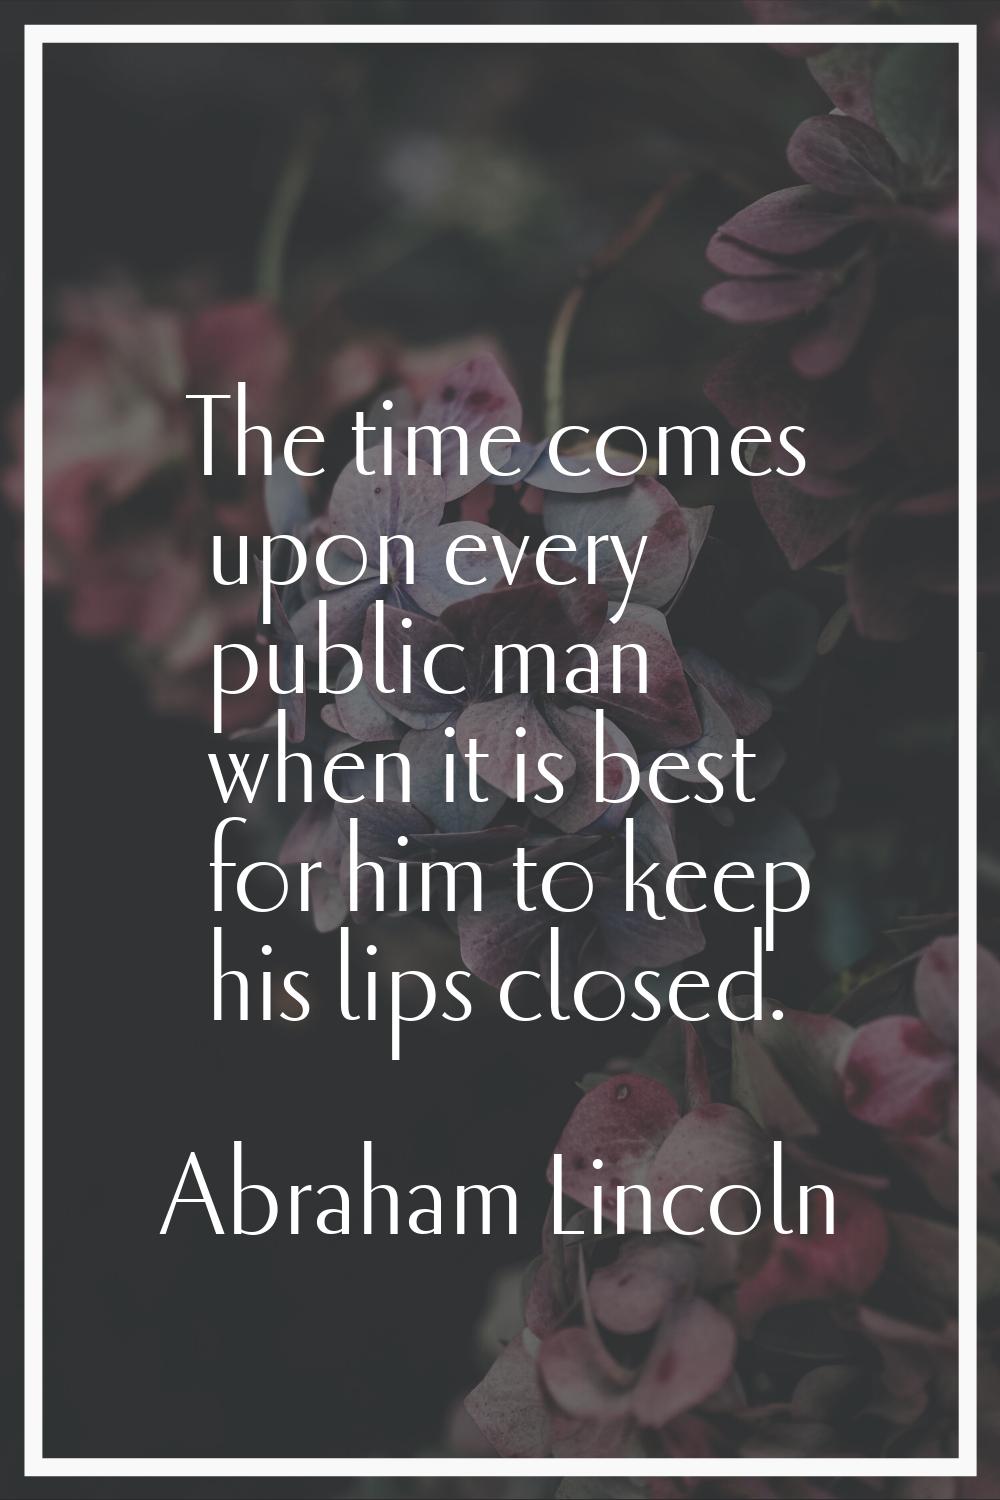 The time comes upon every public man when it is best for him to keep his lips closed.